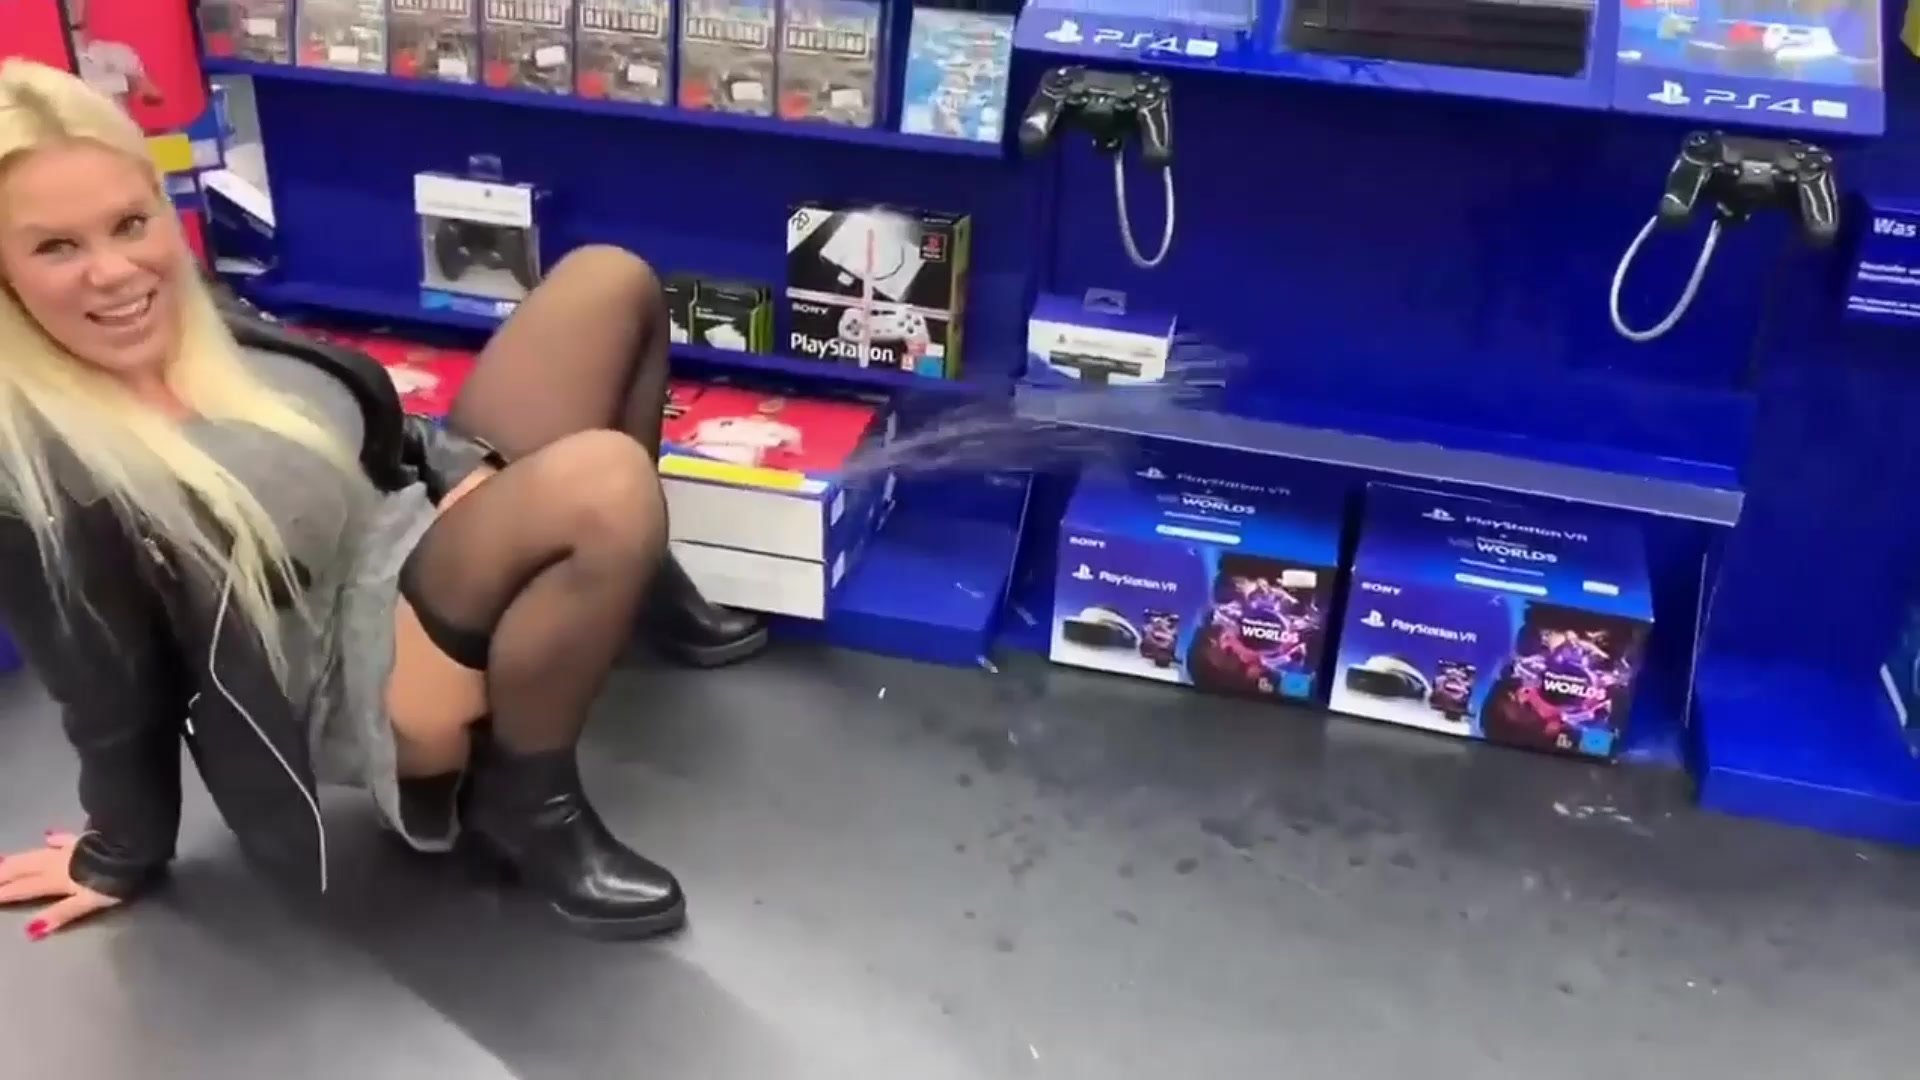 Women pissing on a playstation in store!